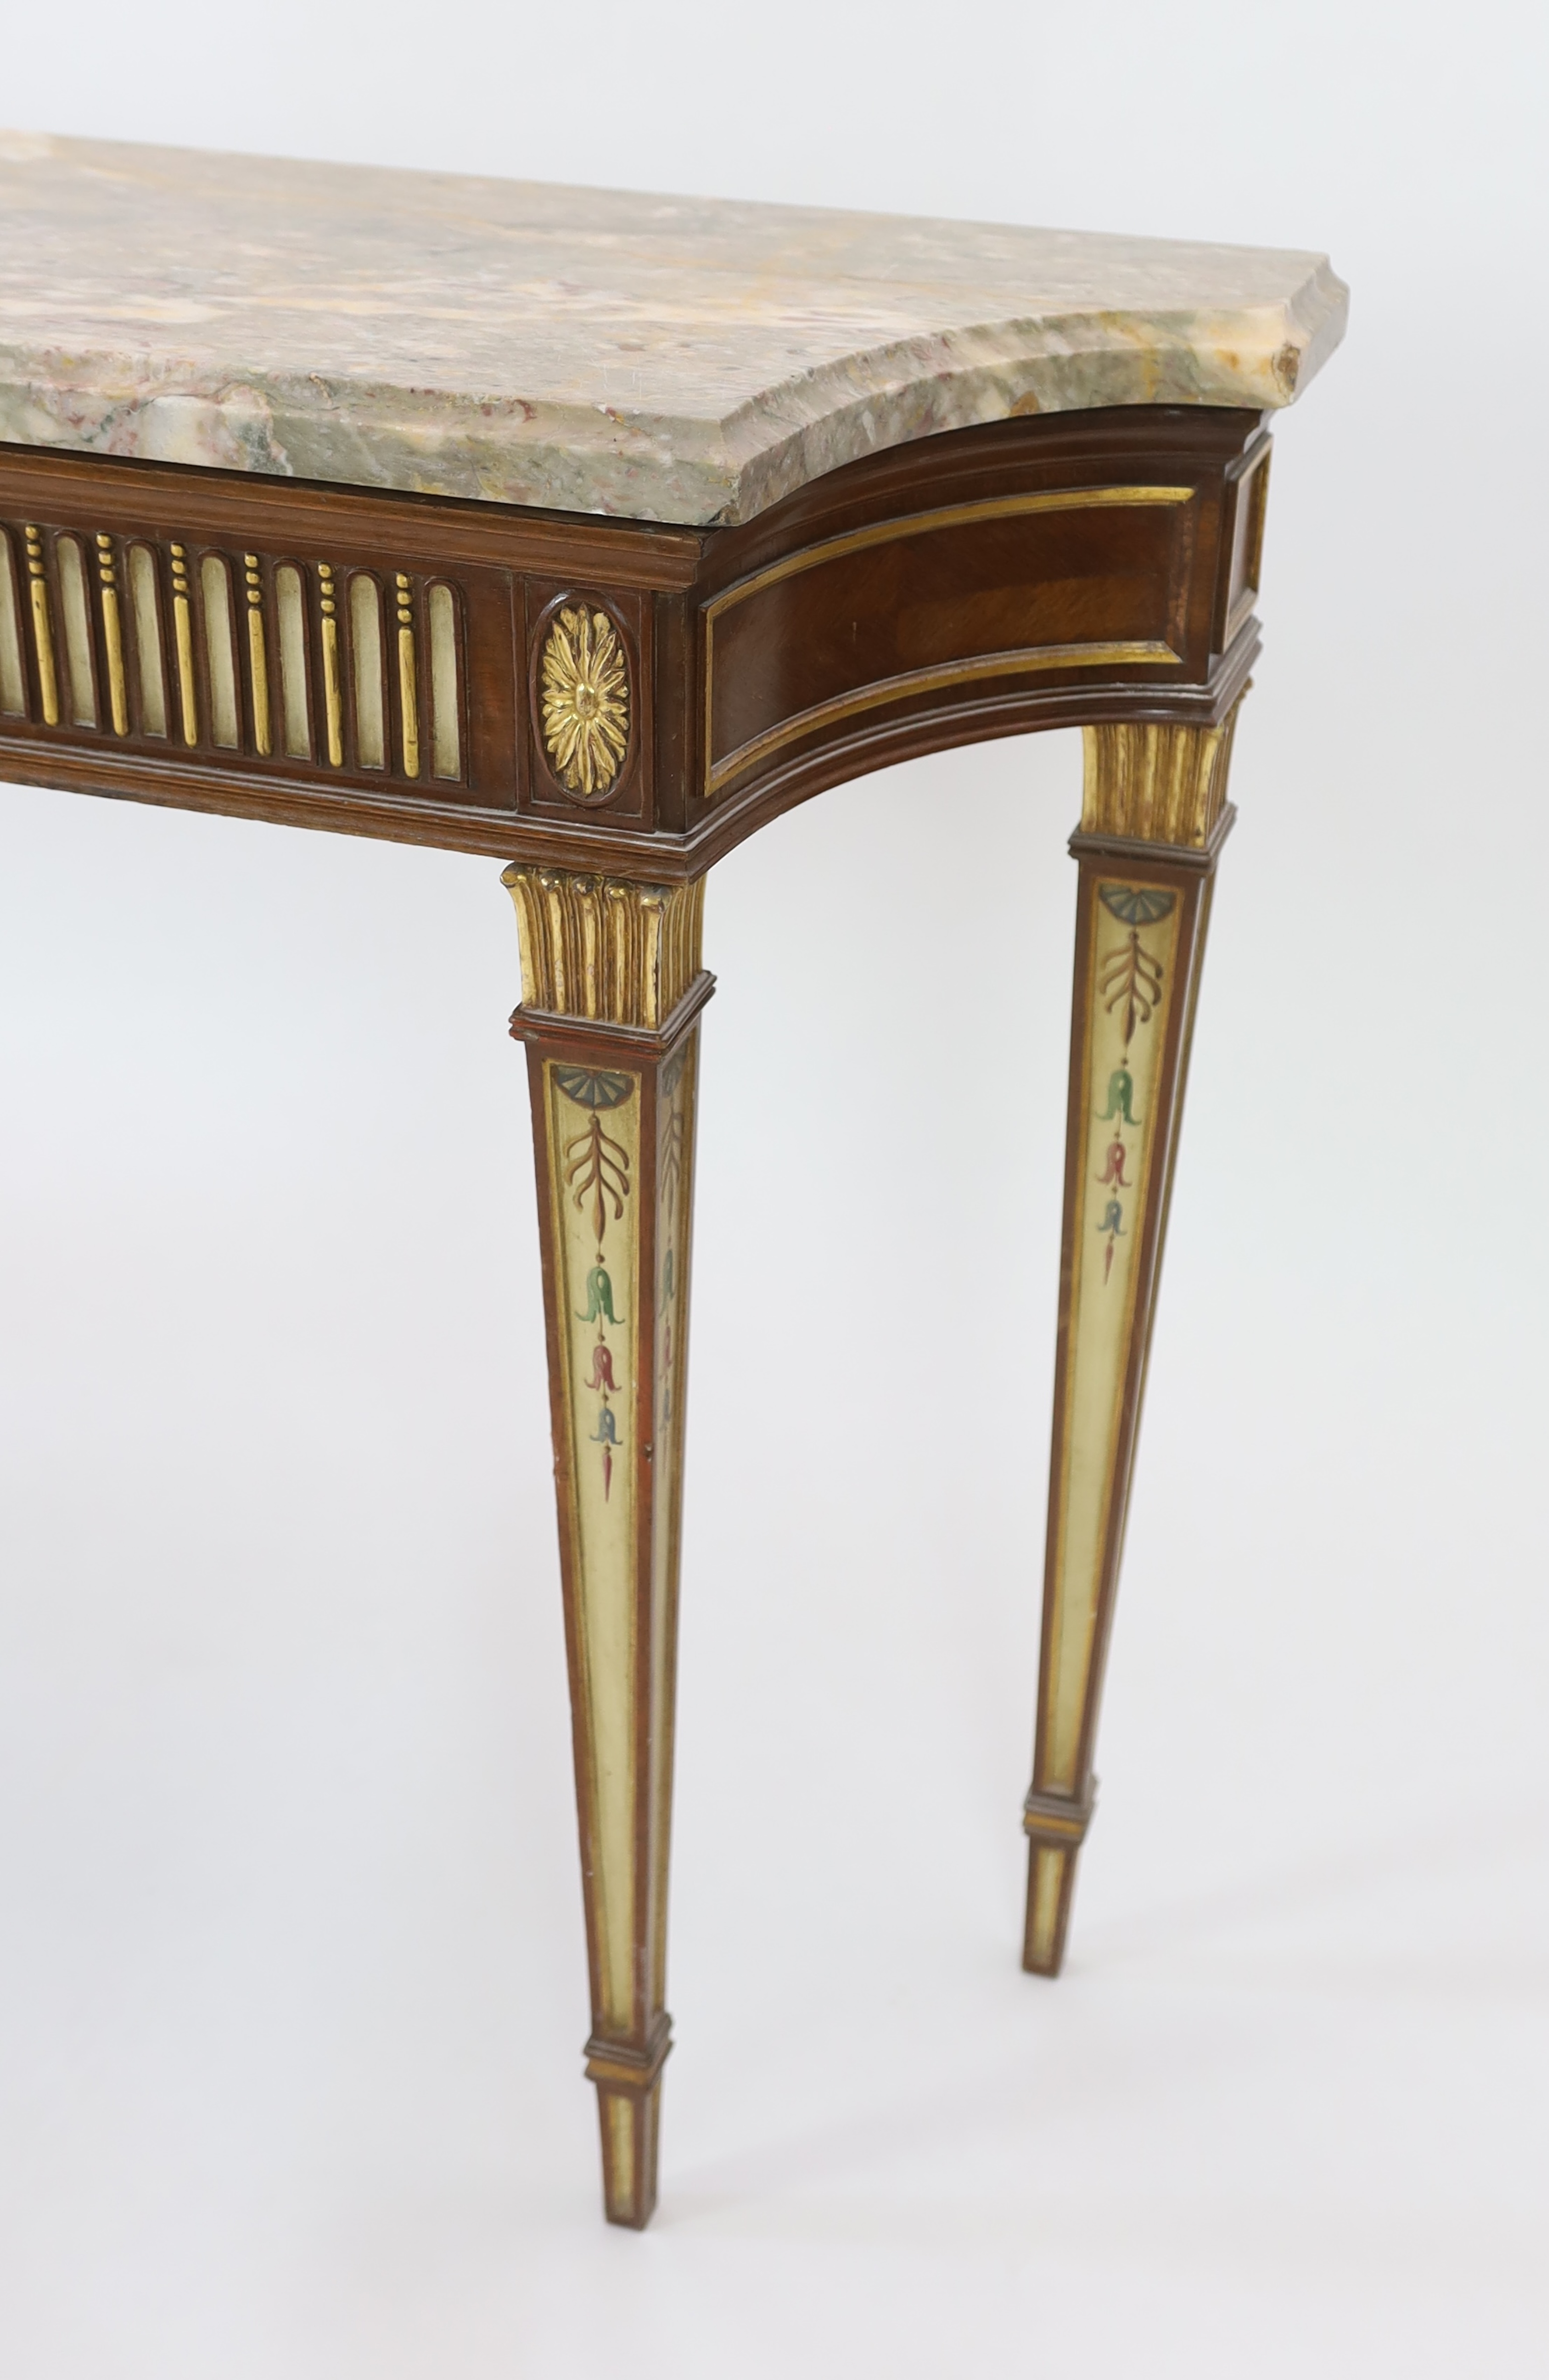 An early 20th century Adam revival part painted and gilt mahogany console table